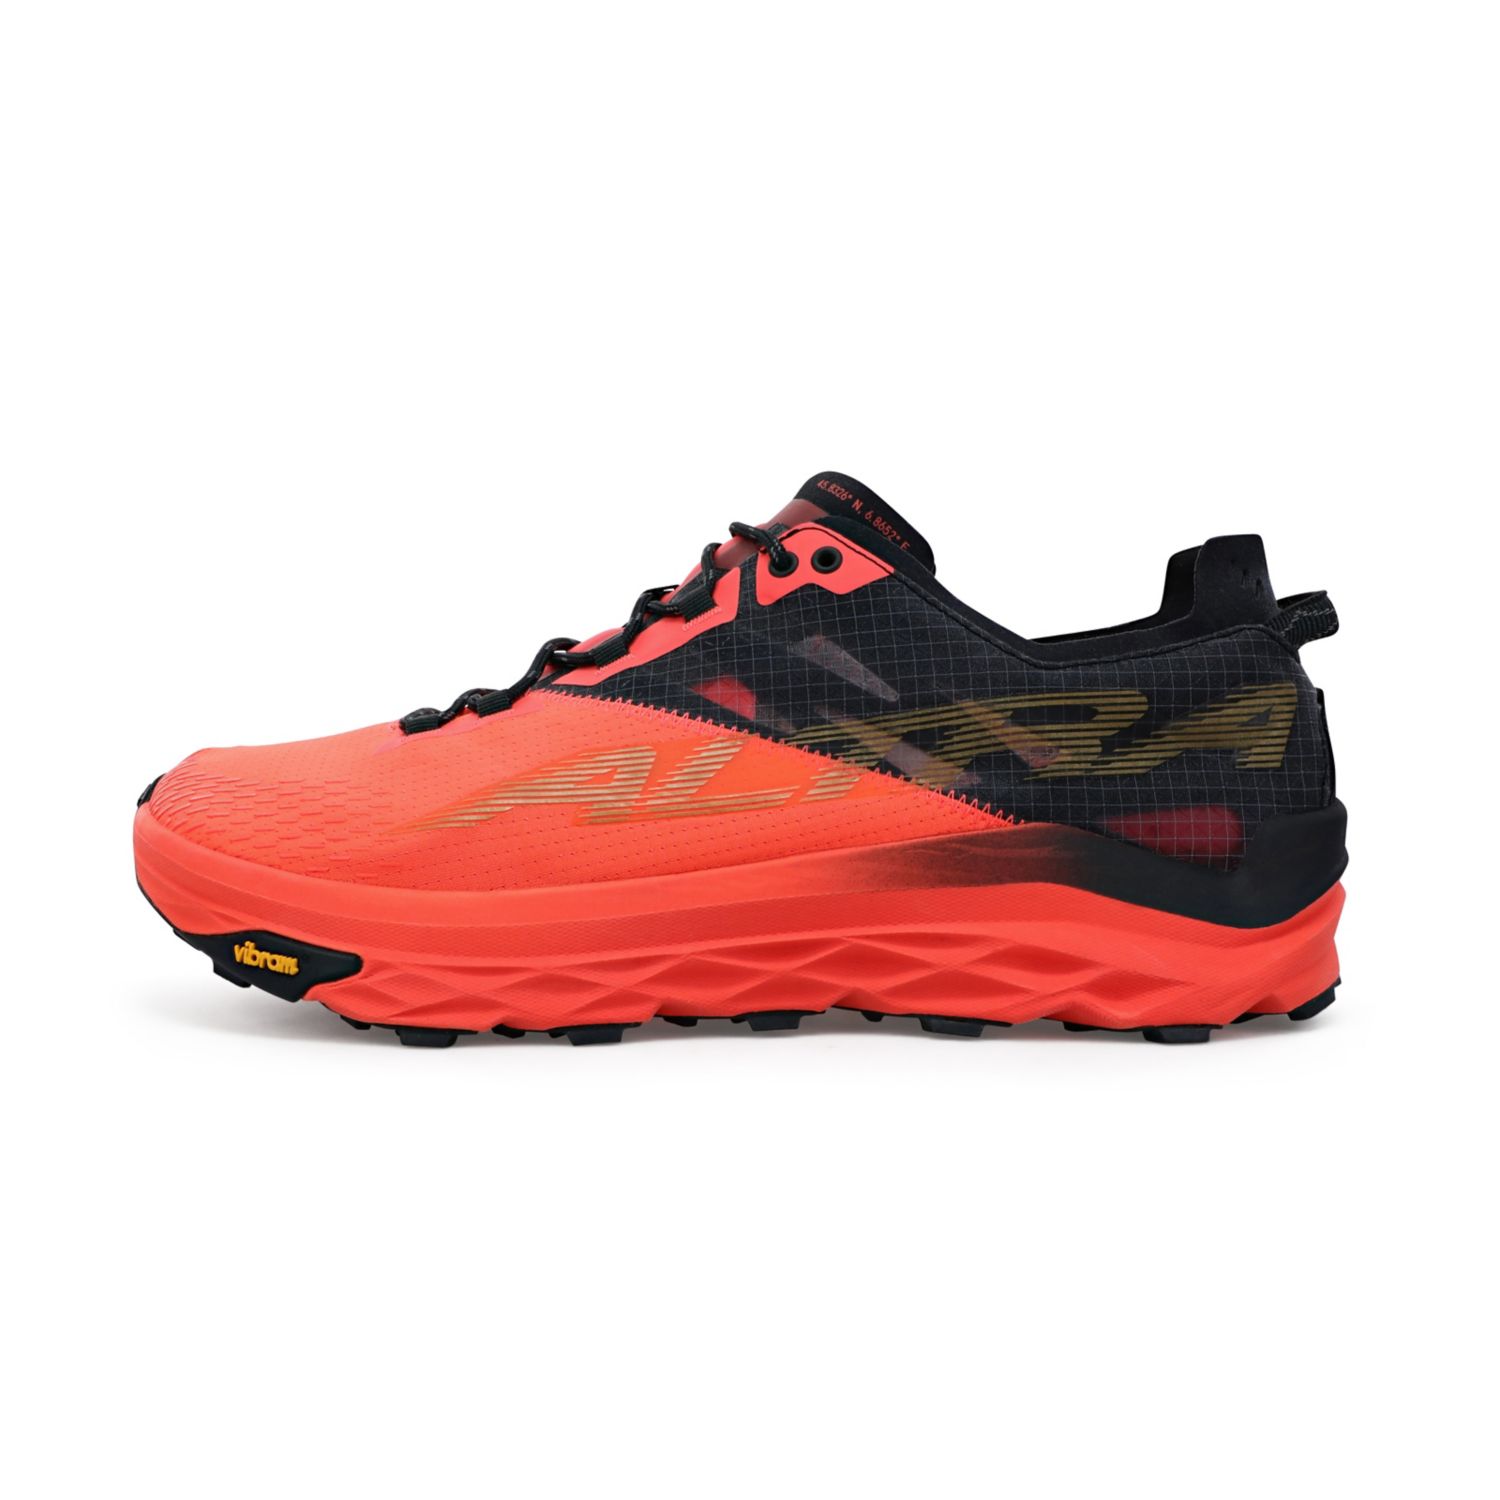 Coral / Black Altra Mont Blanc Women's Trail Running Shoes | Ireland-76924139